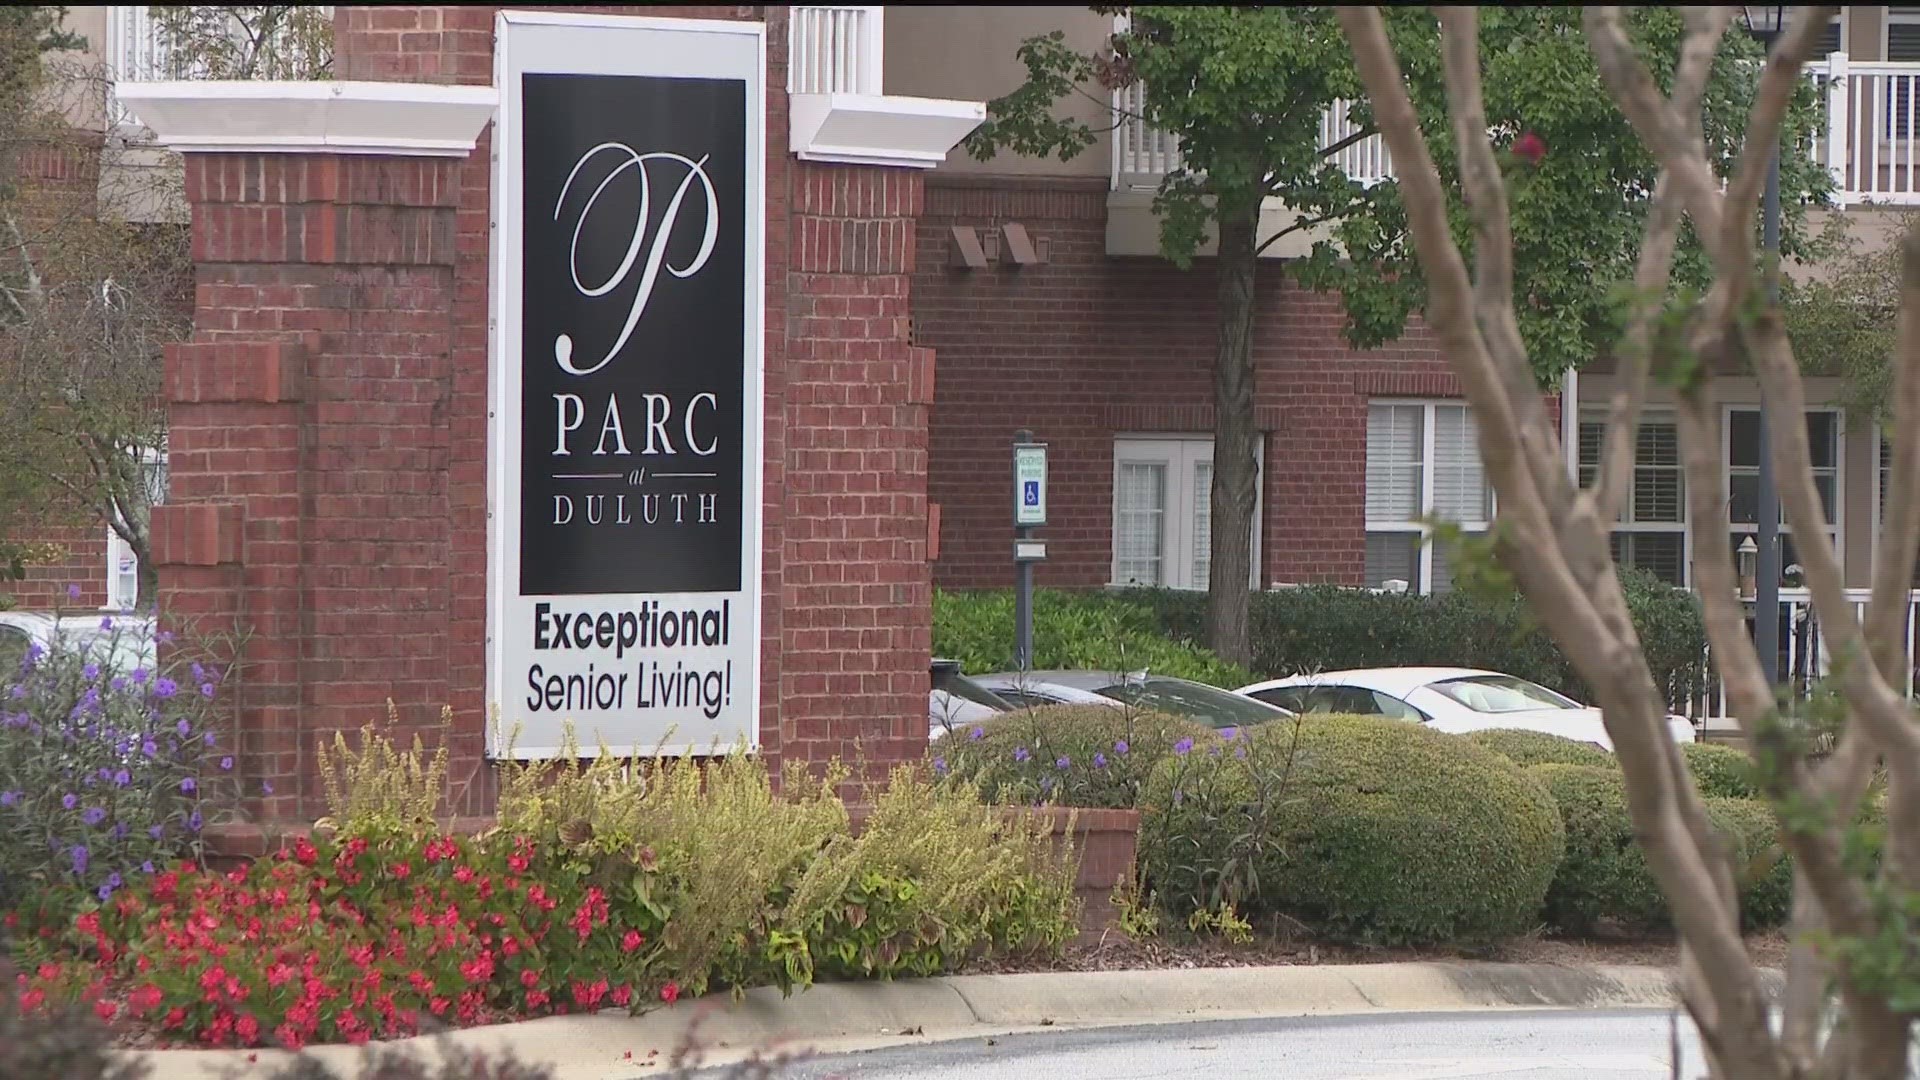 An extremely low score during a food inspection is causing concern for people living at a senior center in Duluth.